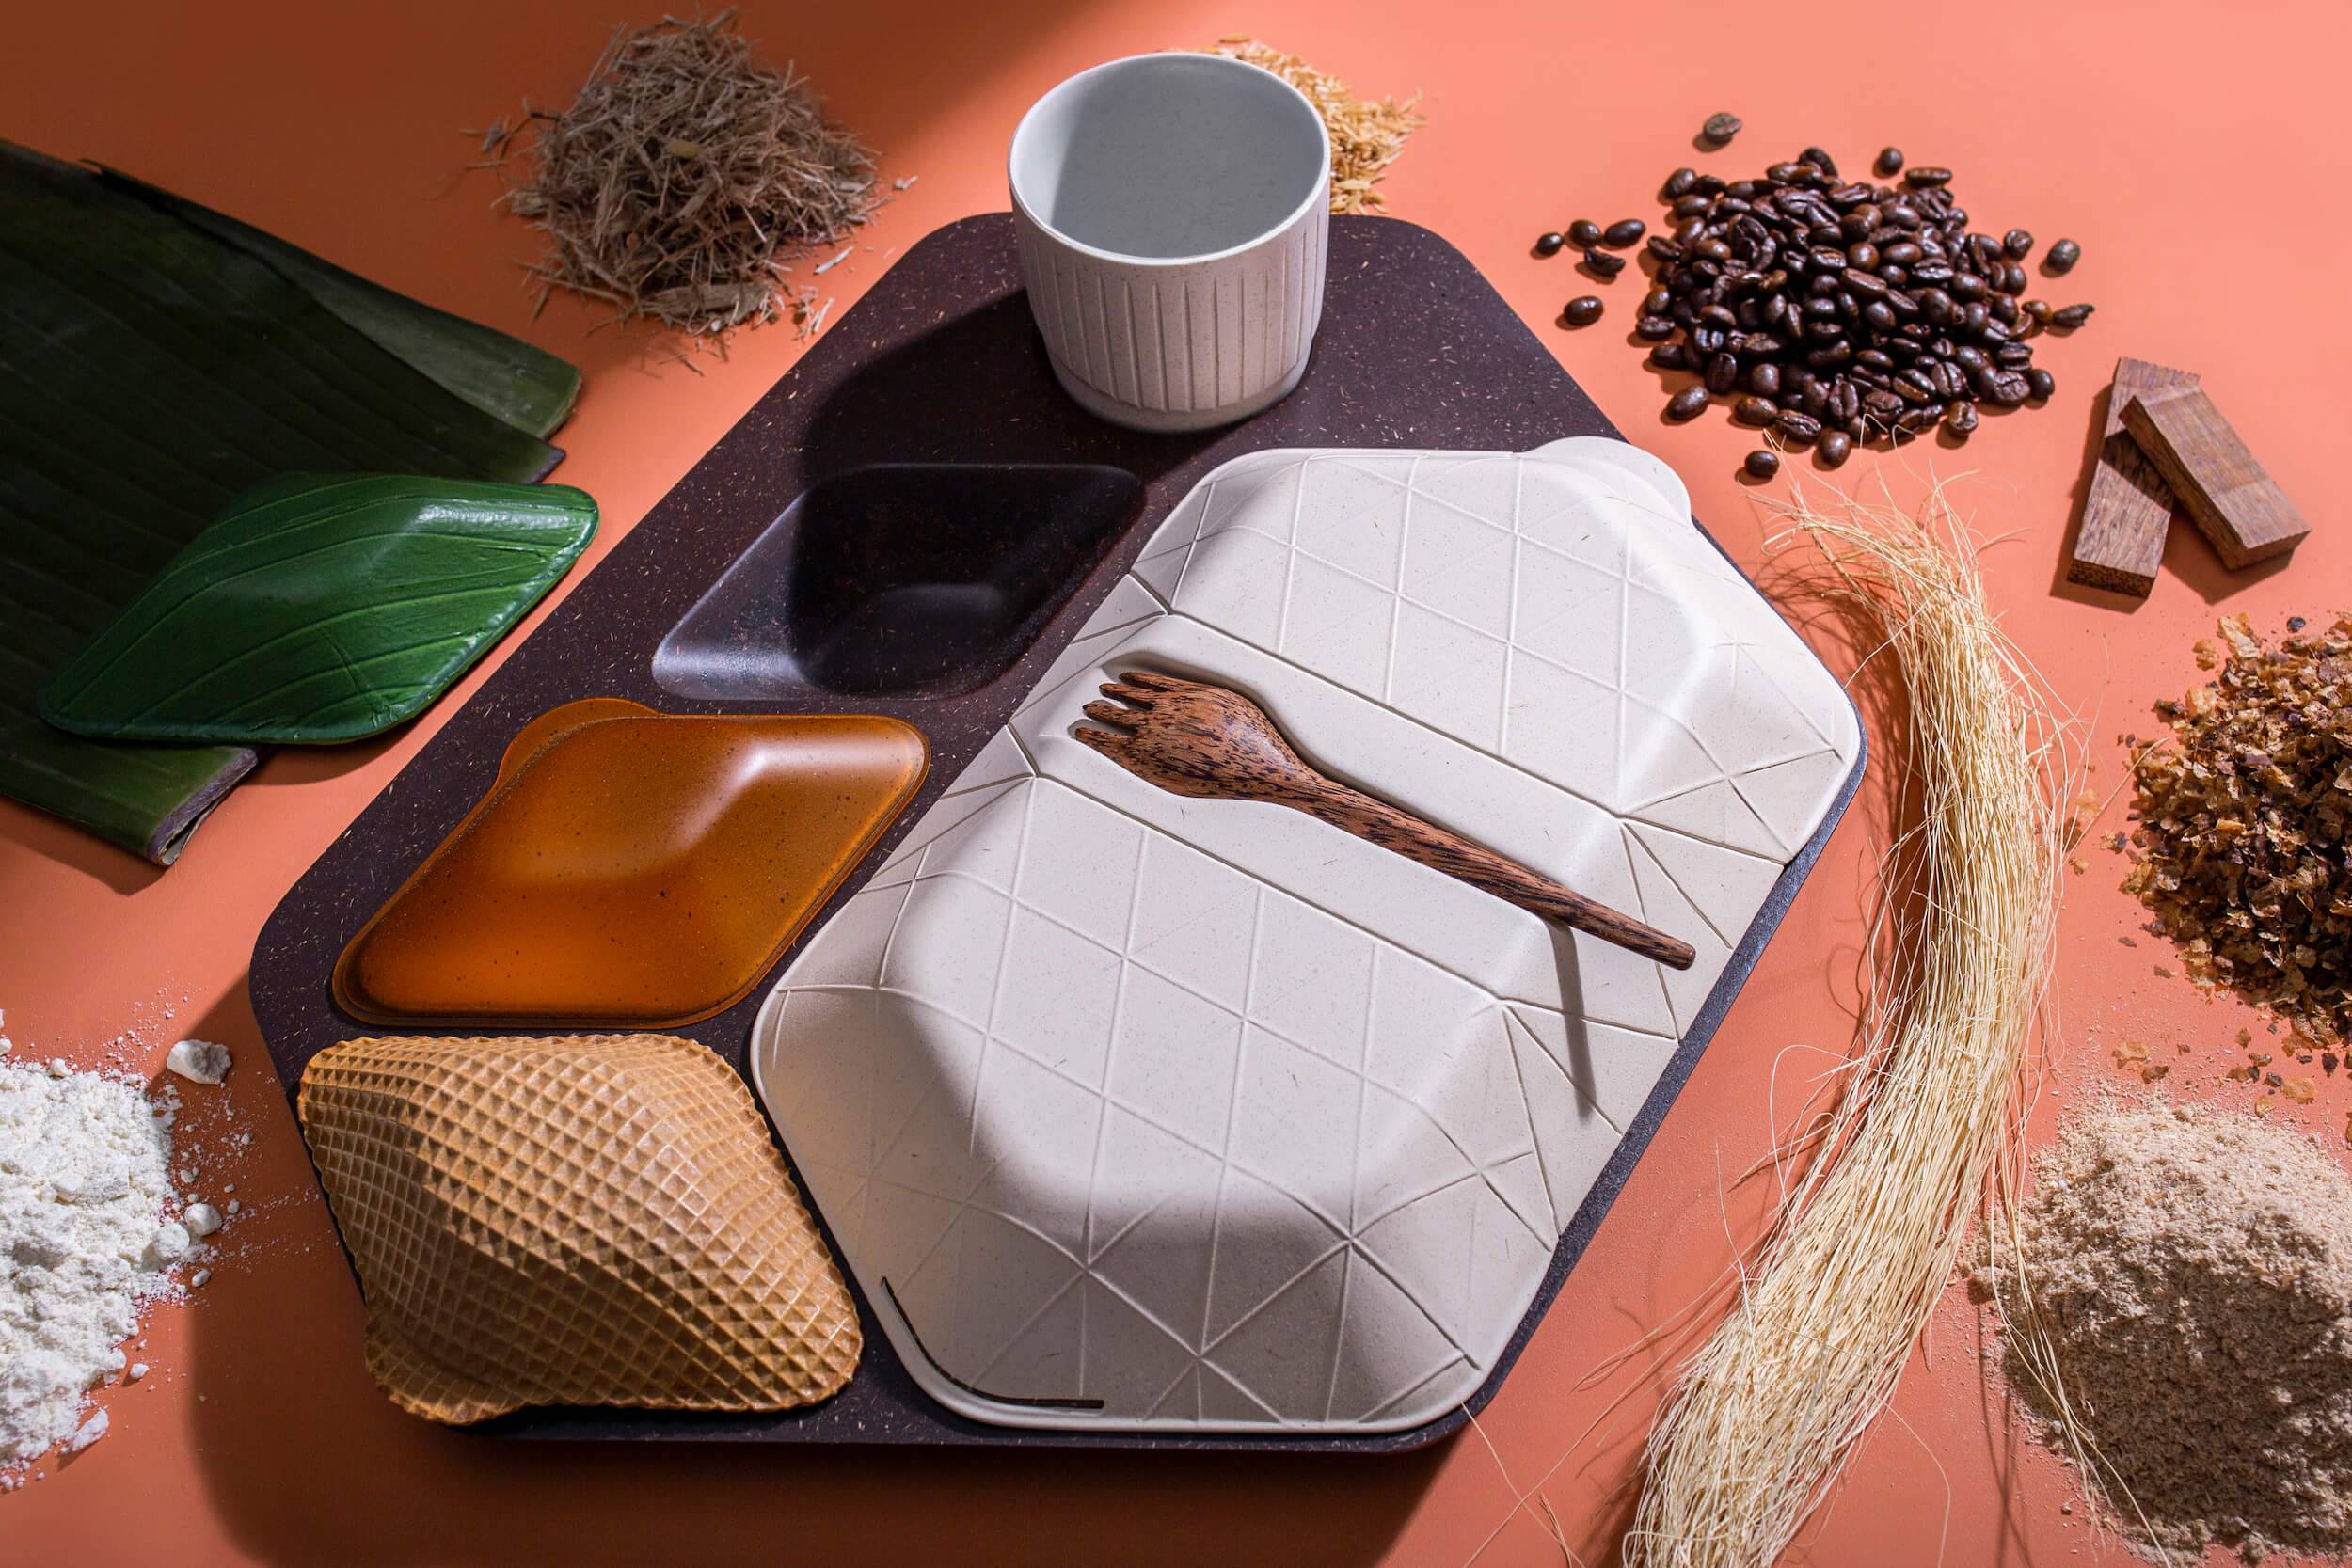 An airline mealtray made of sustainable materials, including wafer biscuit, algae, coffee grounds and coconut wood, shown alongside the raw materials that it is composed of